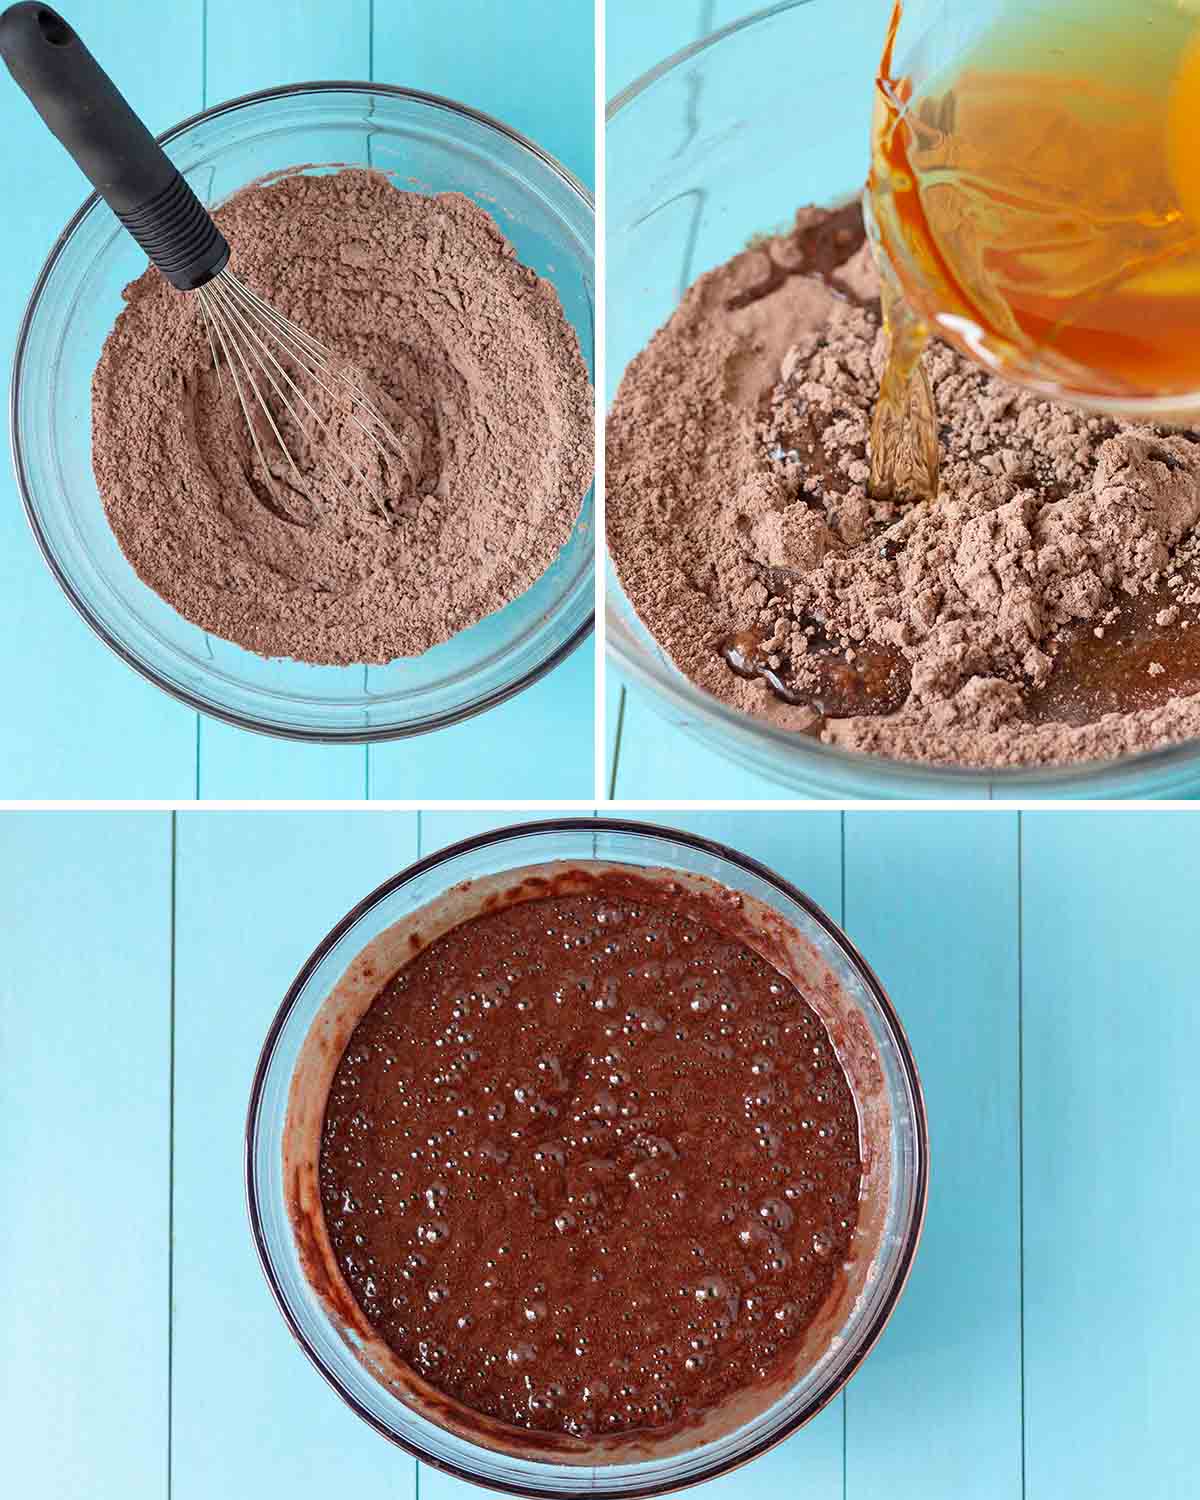 A collage of three images showing the first sequence of steps needed to make vegan gf chocolate cupcakes.